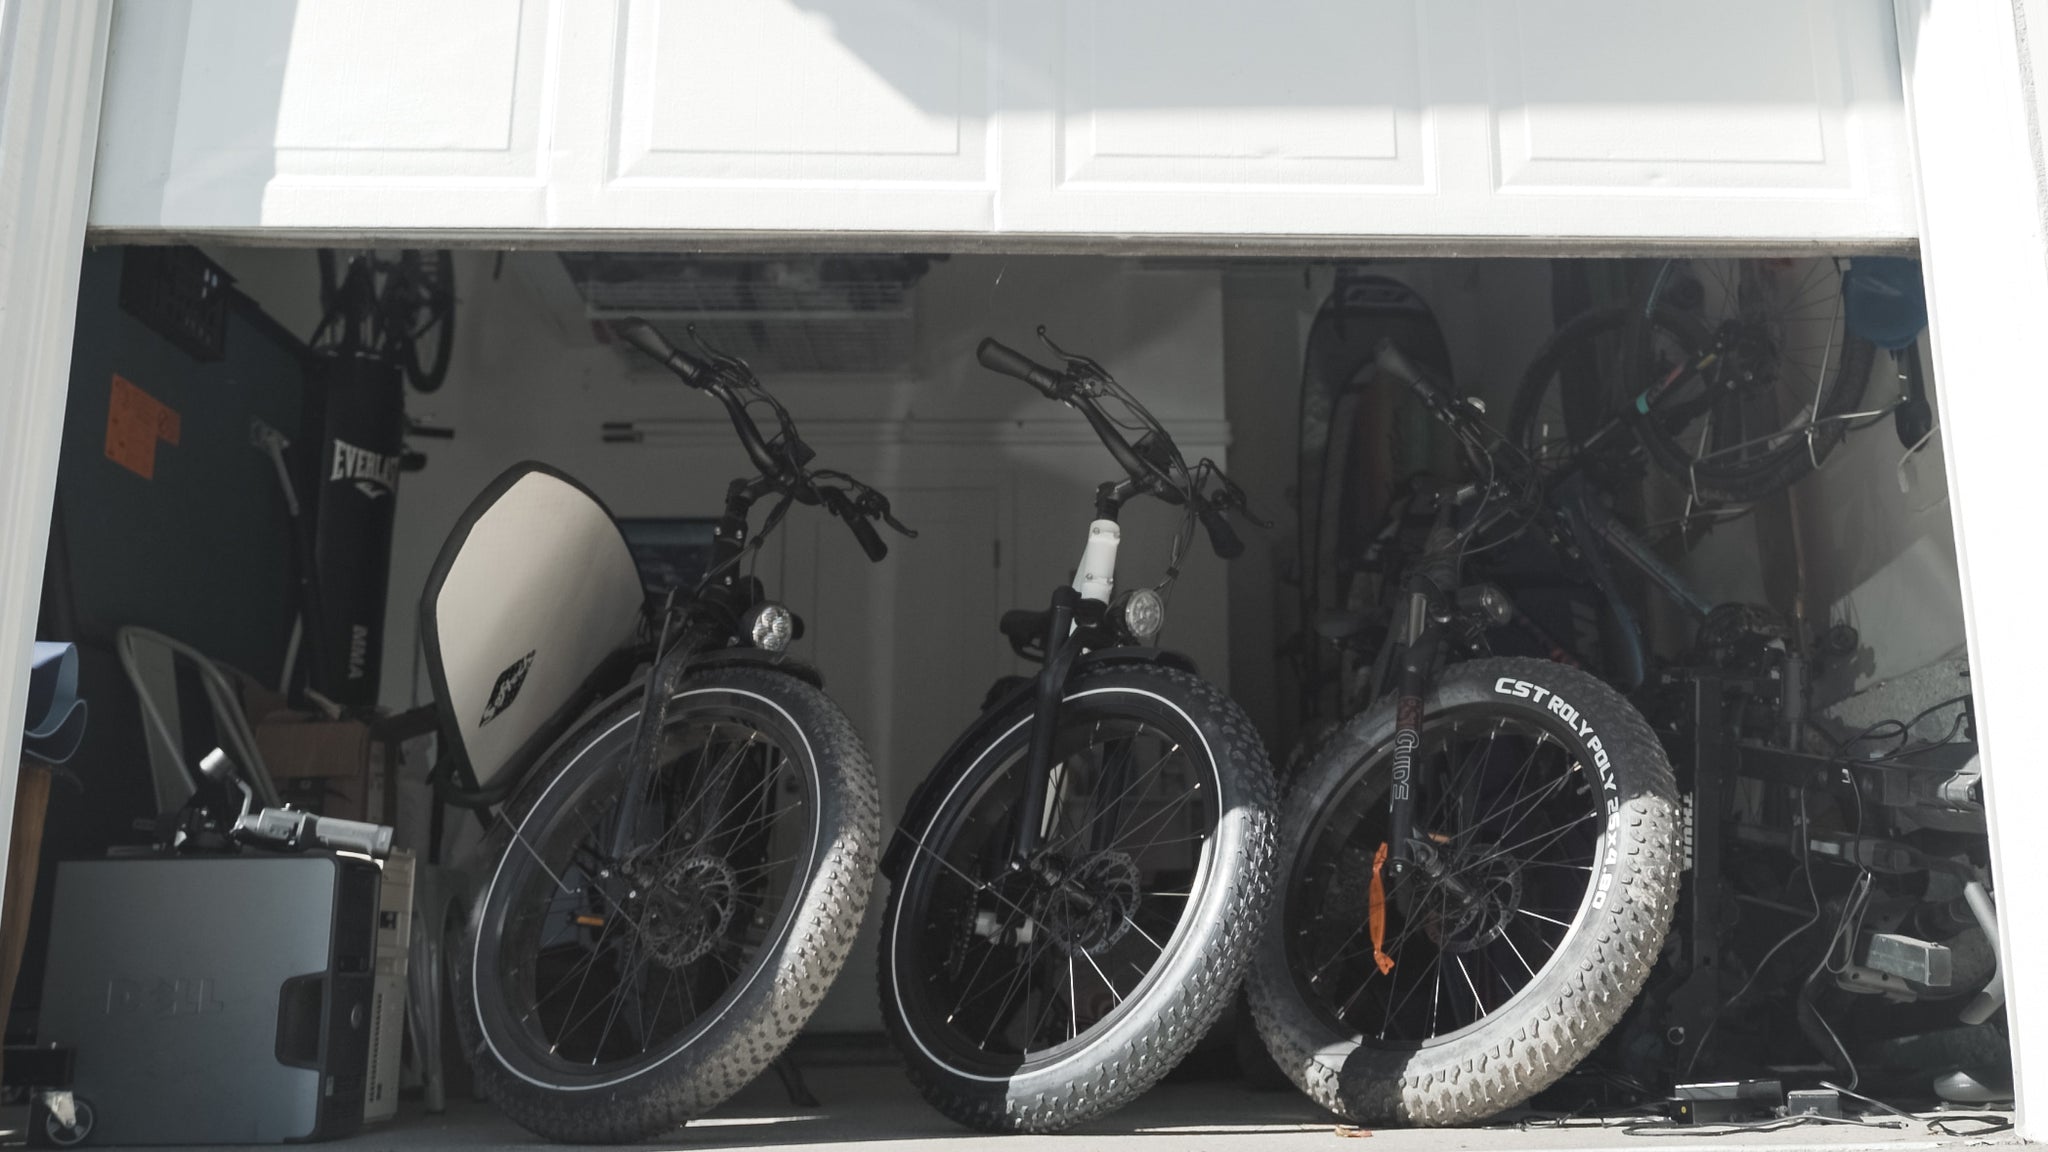 Selection of Ebikes